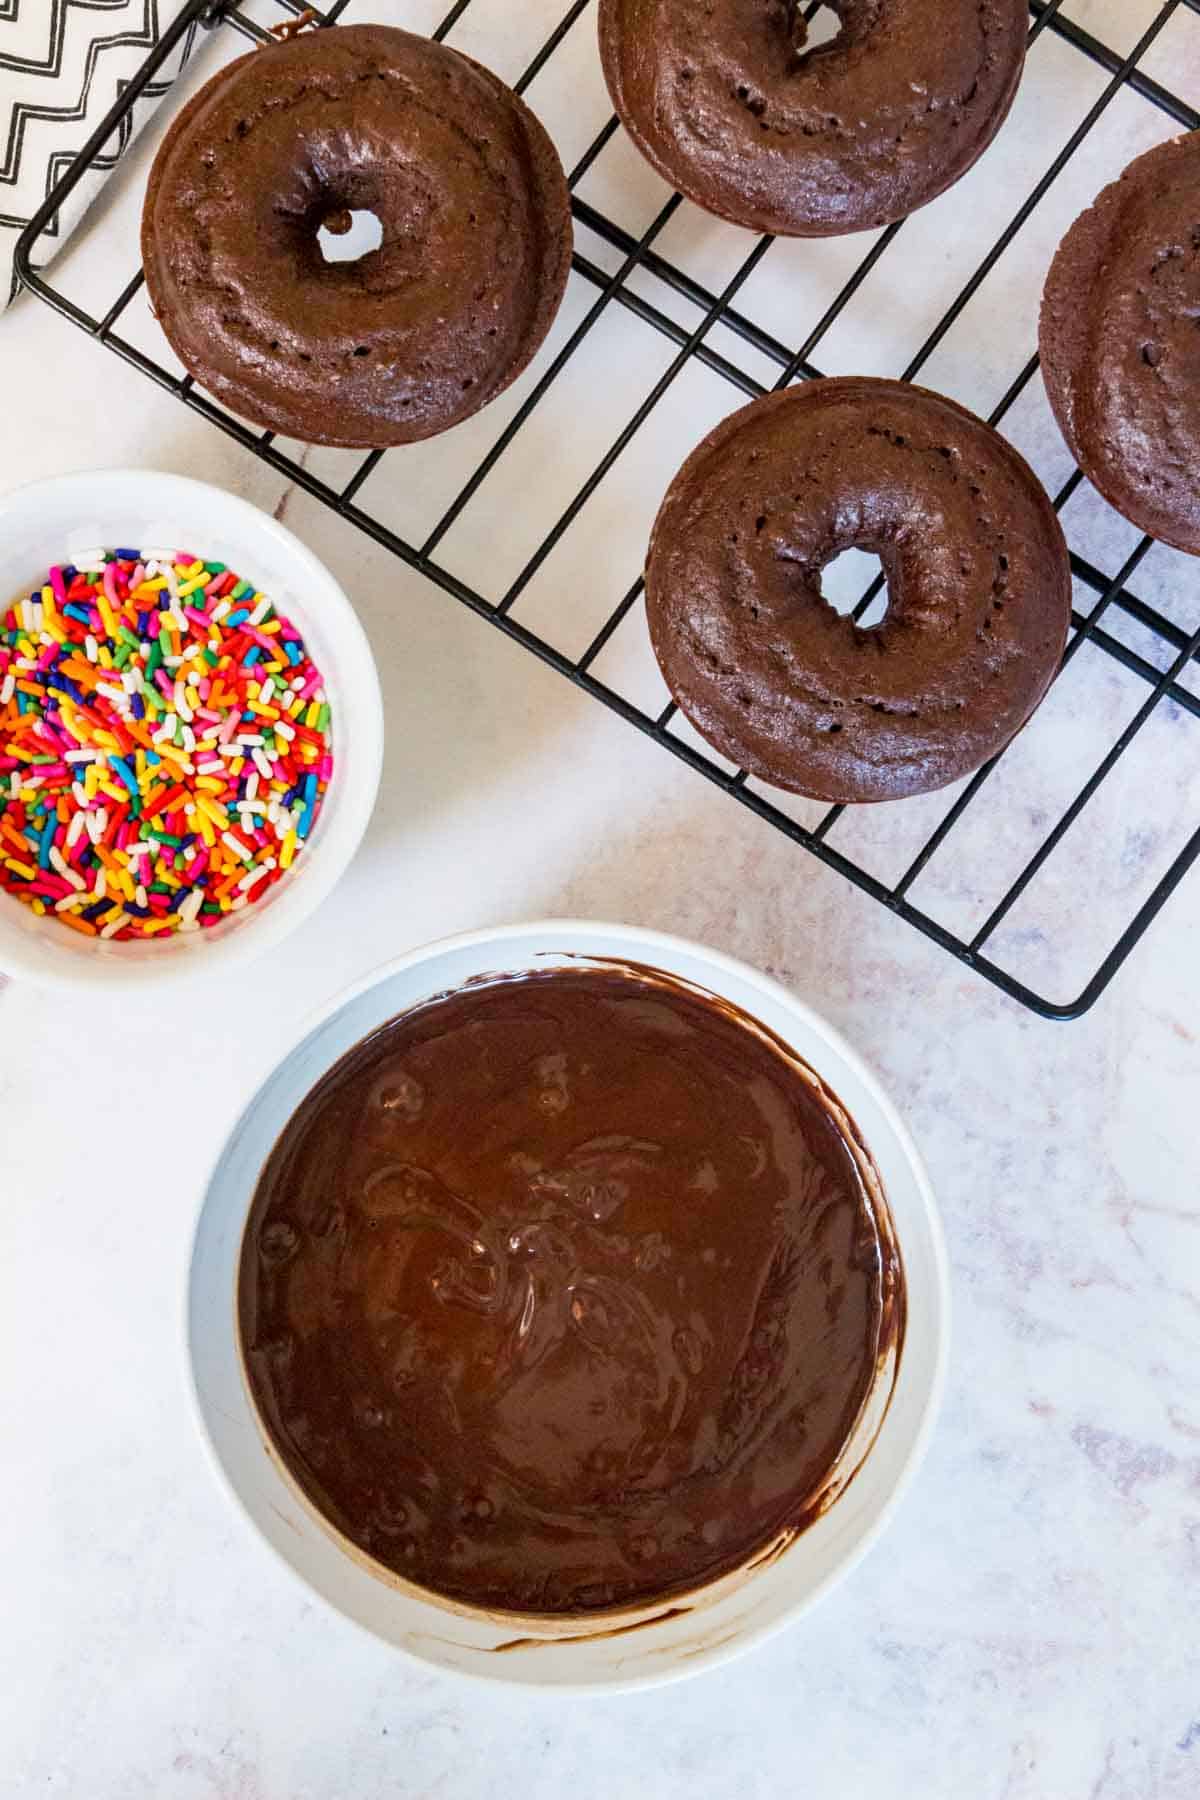 Chocolate donuts on a wire rack, next to a bowl of chocolate glaze.